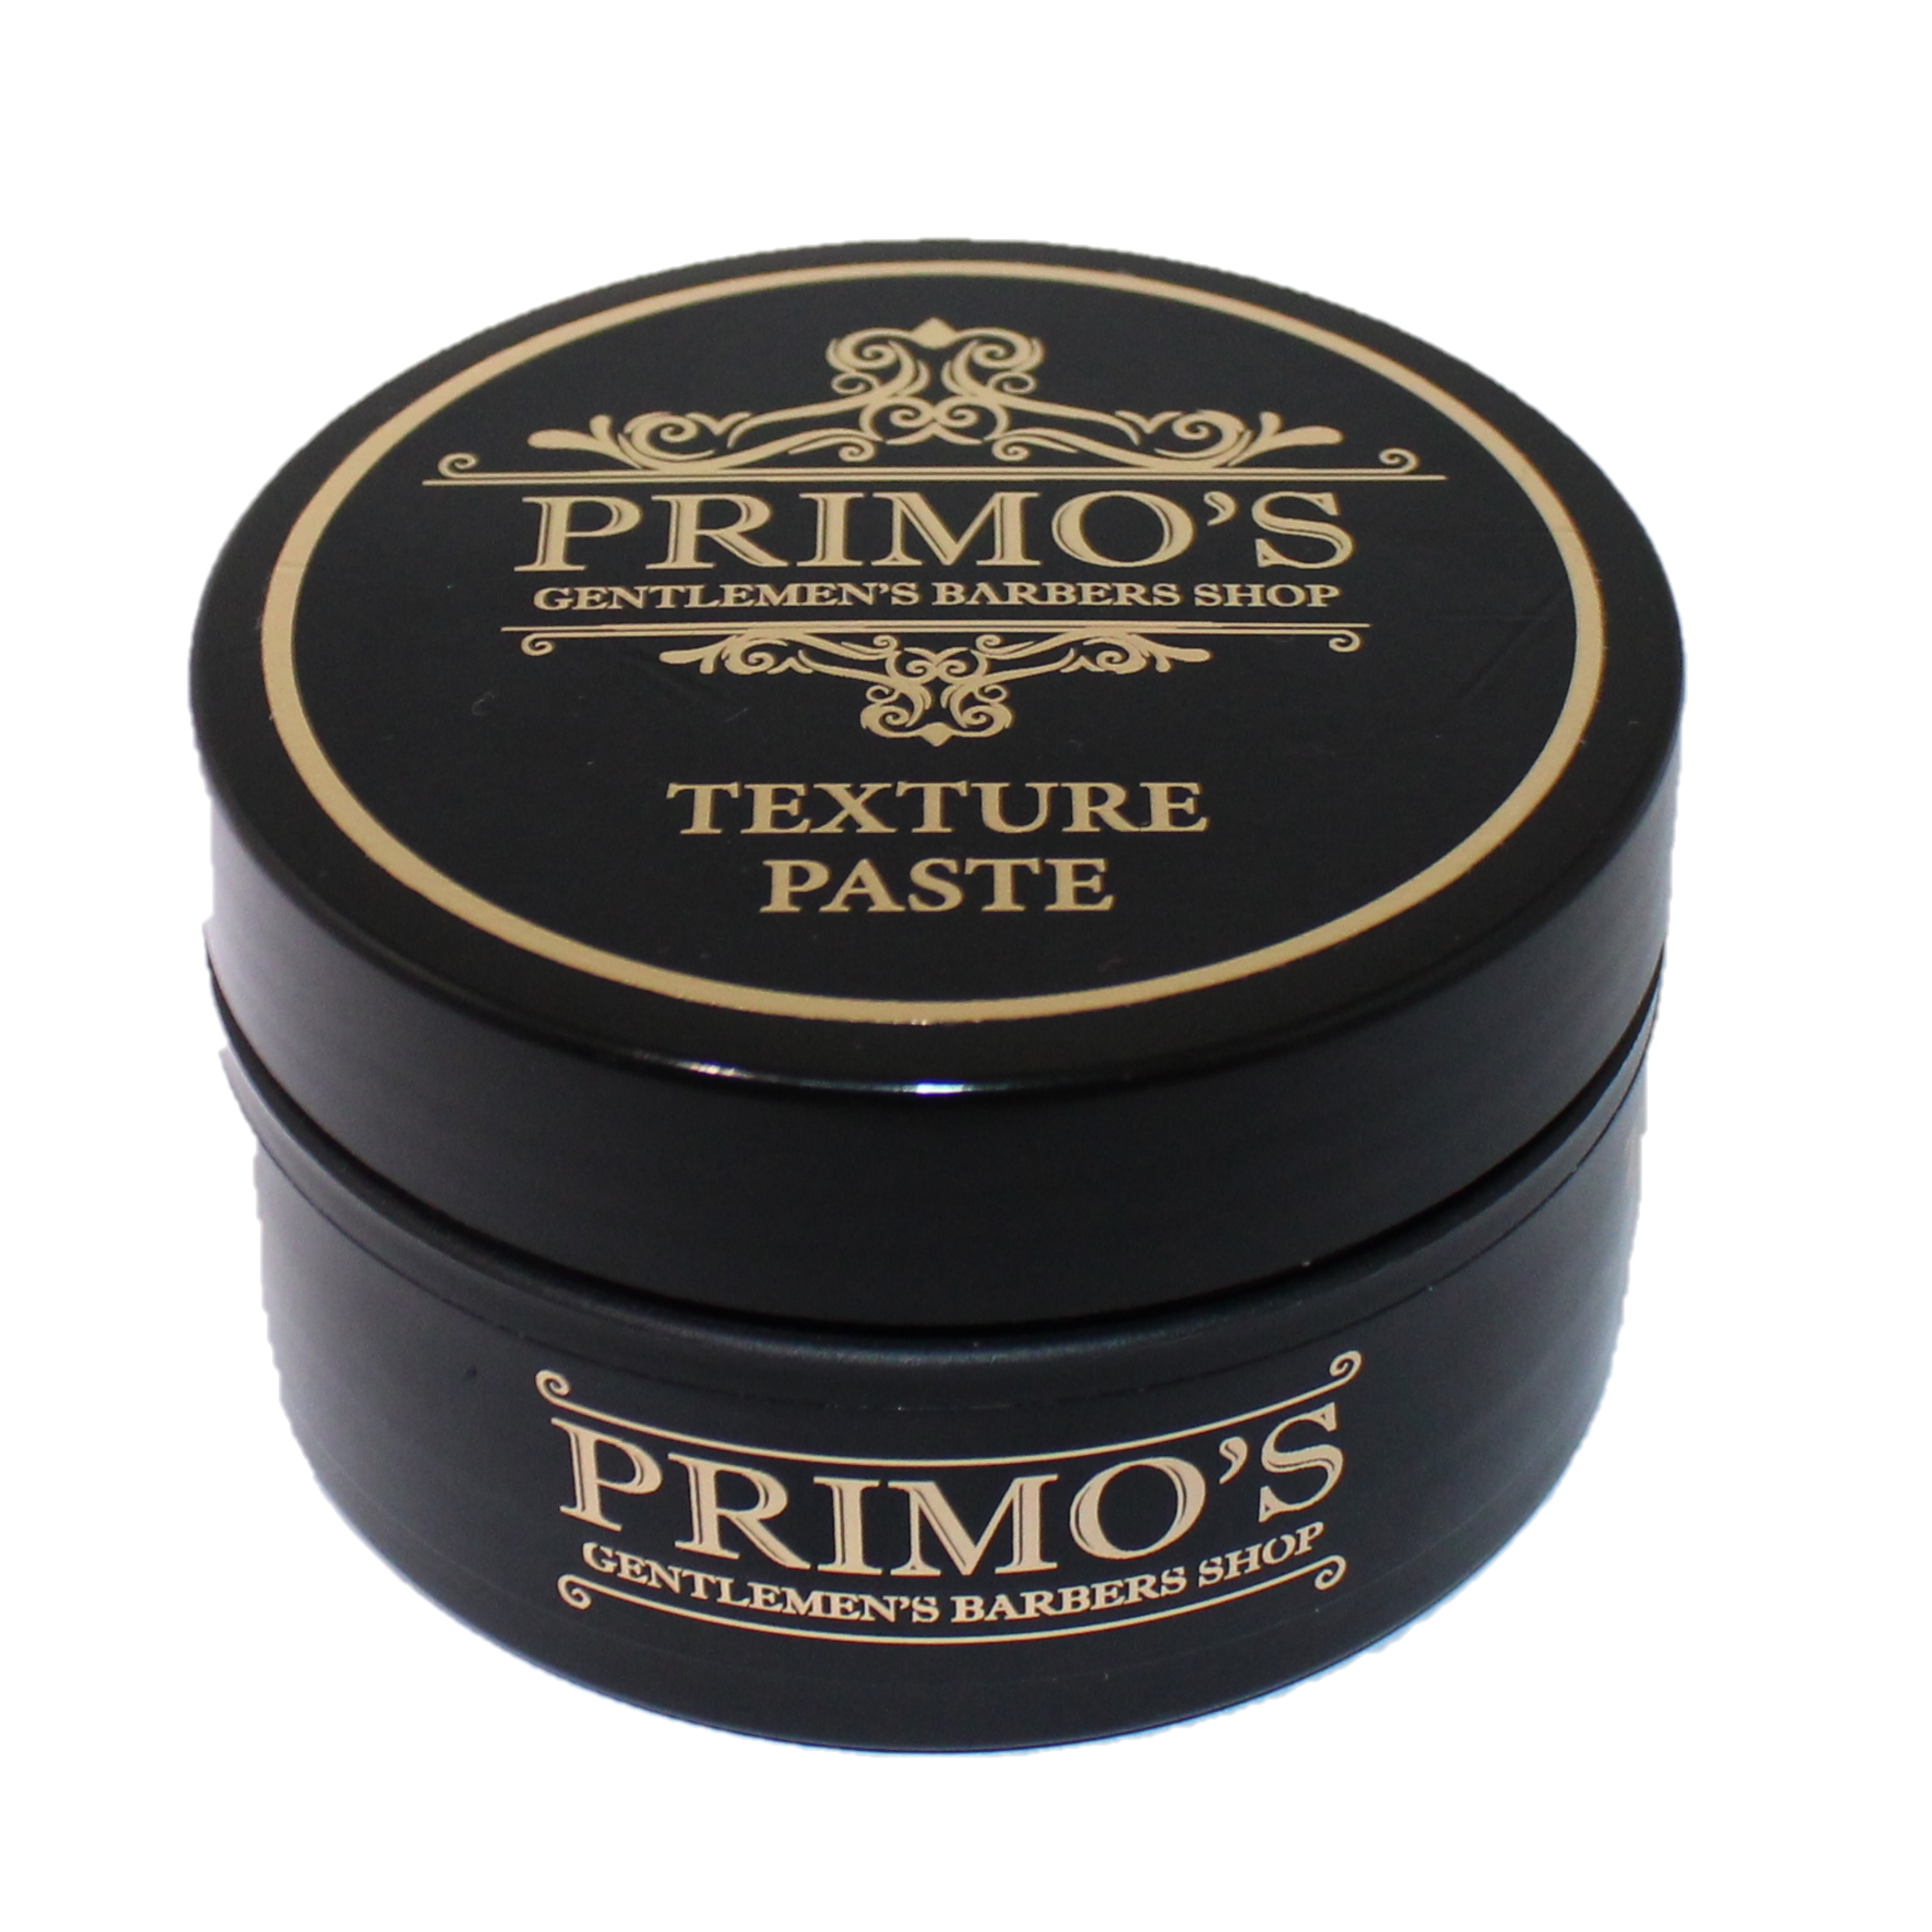 Tring barber Texture paste